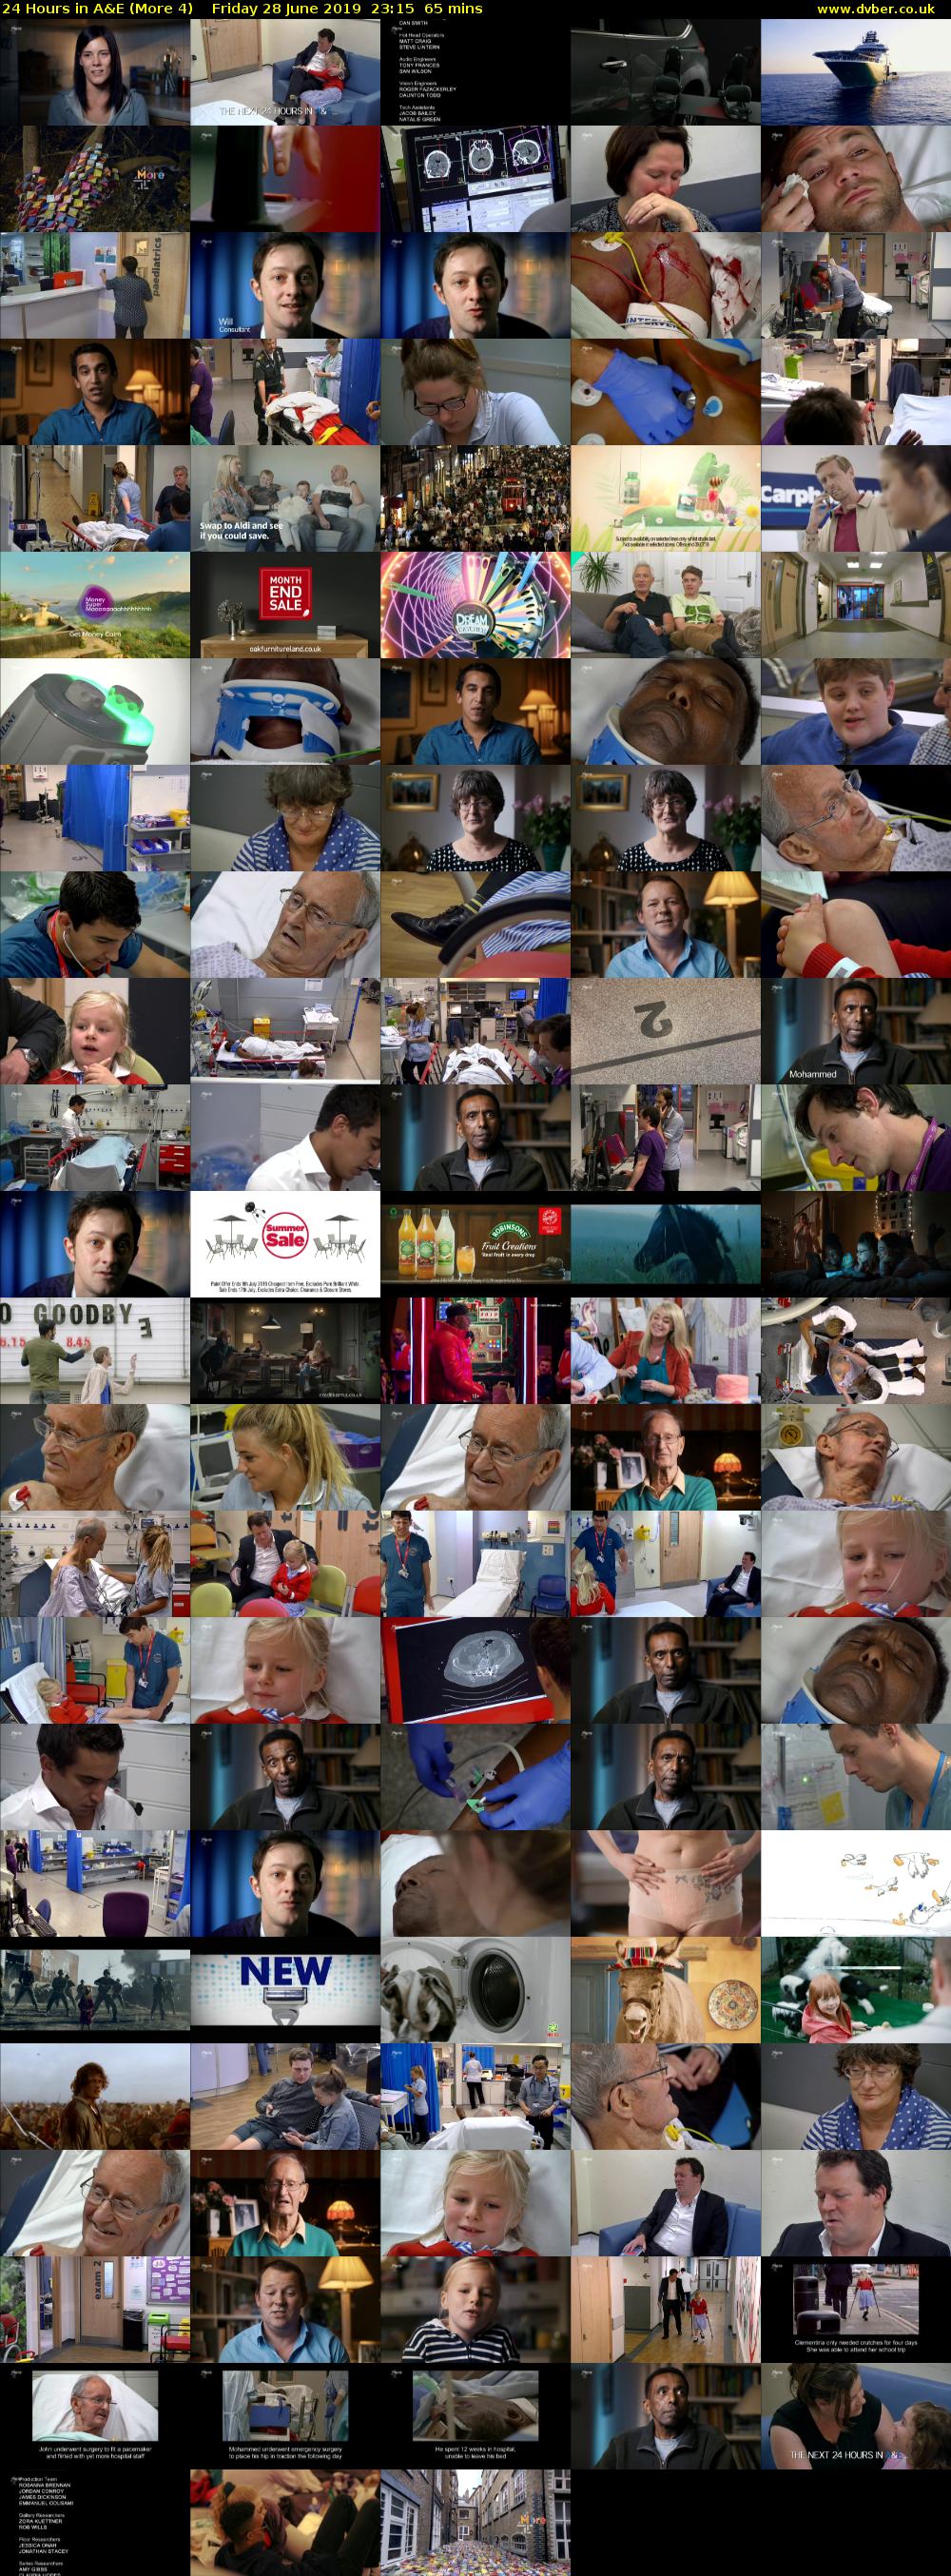 24 Hours in A&E (More 4) Friday 28 June 2019 23:15 - 00:20